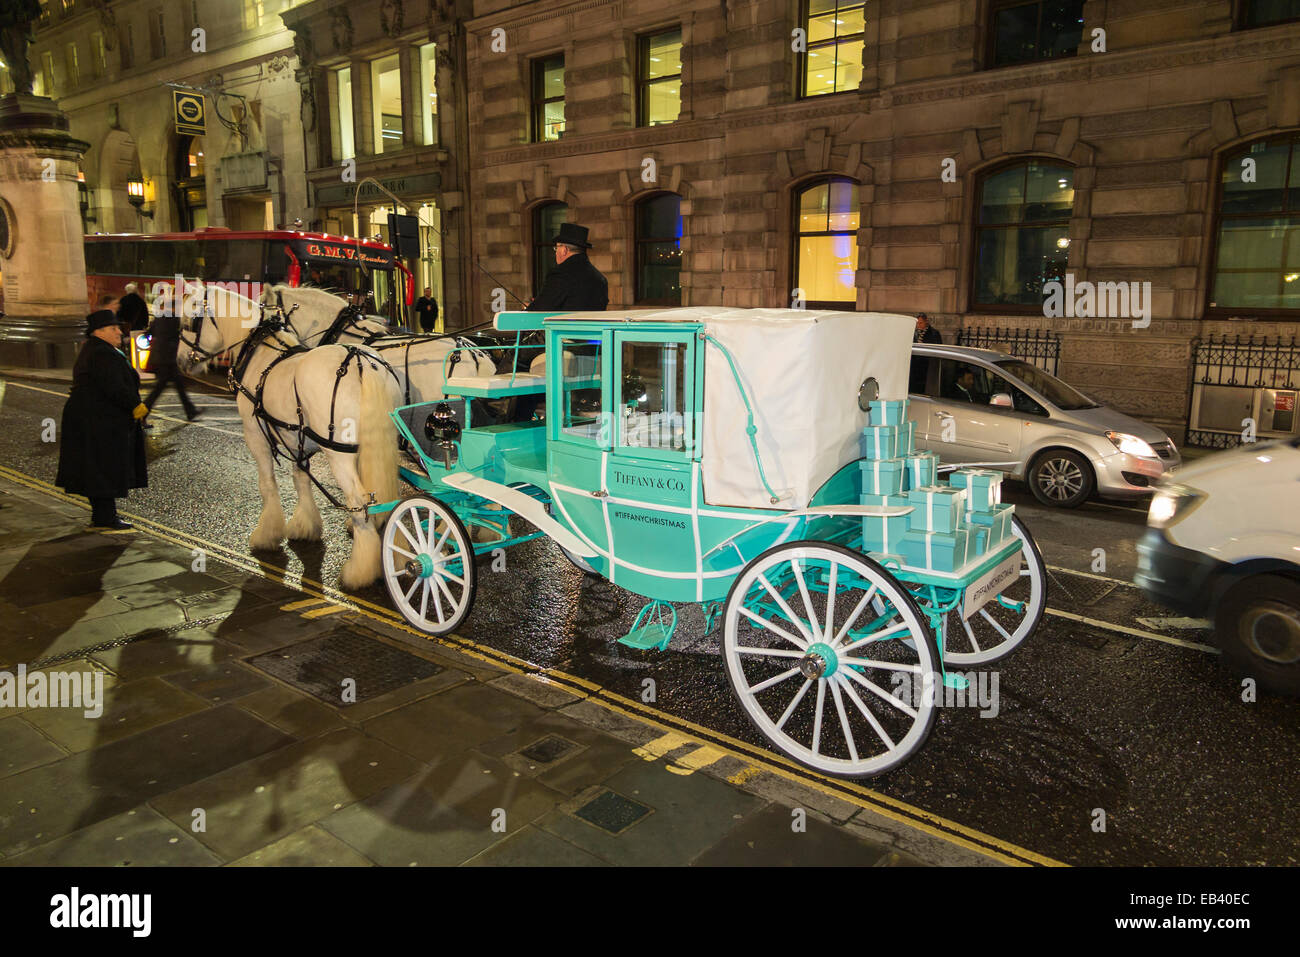 London, UK. 25th Nov, 2014. Two white shire horses pull a blue Tiffany & Co carriage through the streets of the City of London, UK.  The occasion was seasonal celebrations and festivities leading up to the switching on of the festive season Tiffany & Co Christmas tree illuminations on the steps outside the iconic Royal Exchange in the City of London by Sheriff Waddingham of the City of London, on Tuesday 25 November 2014. Credit:  Graham Prentice/Alamy Live News Stock Photo